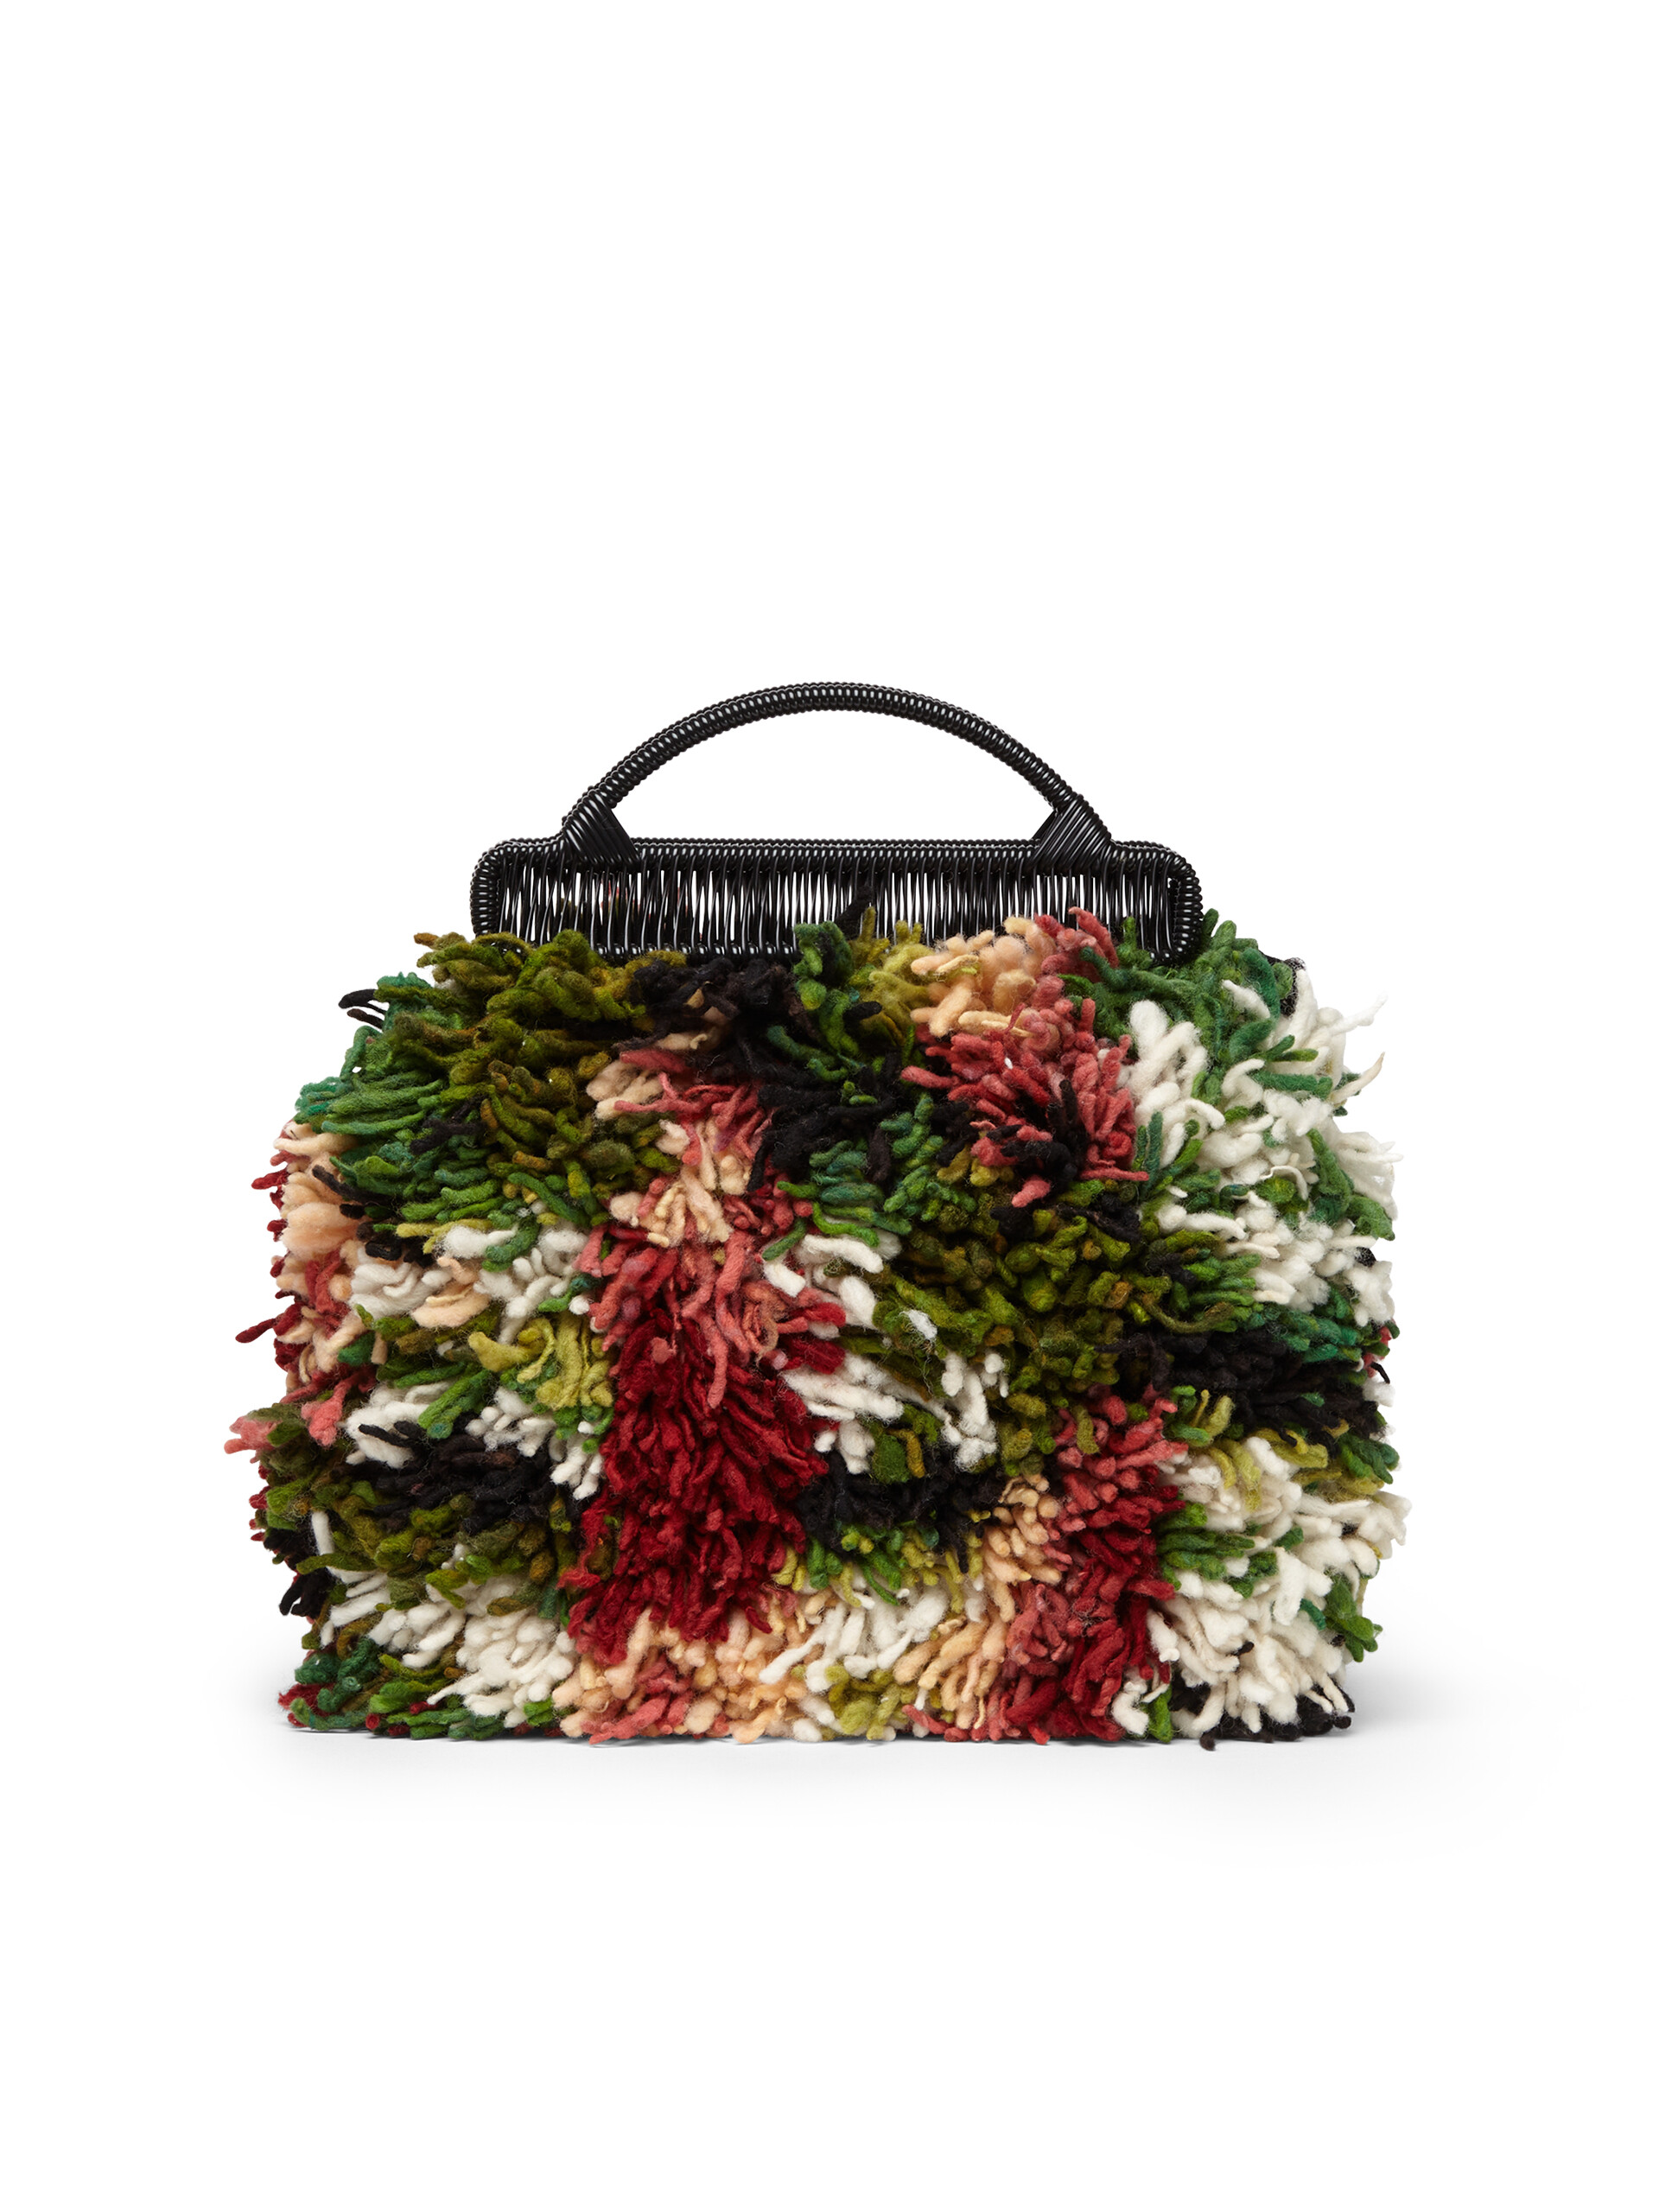 MARNI MARKET multicoloured frame bag in green burgundy and white long wool - Furniture - Image 3